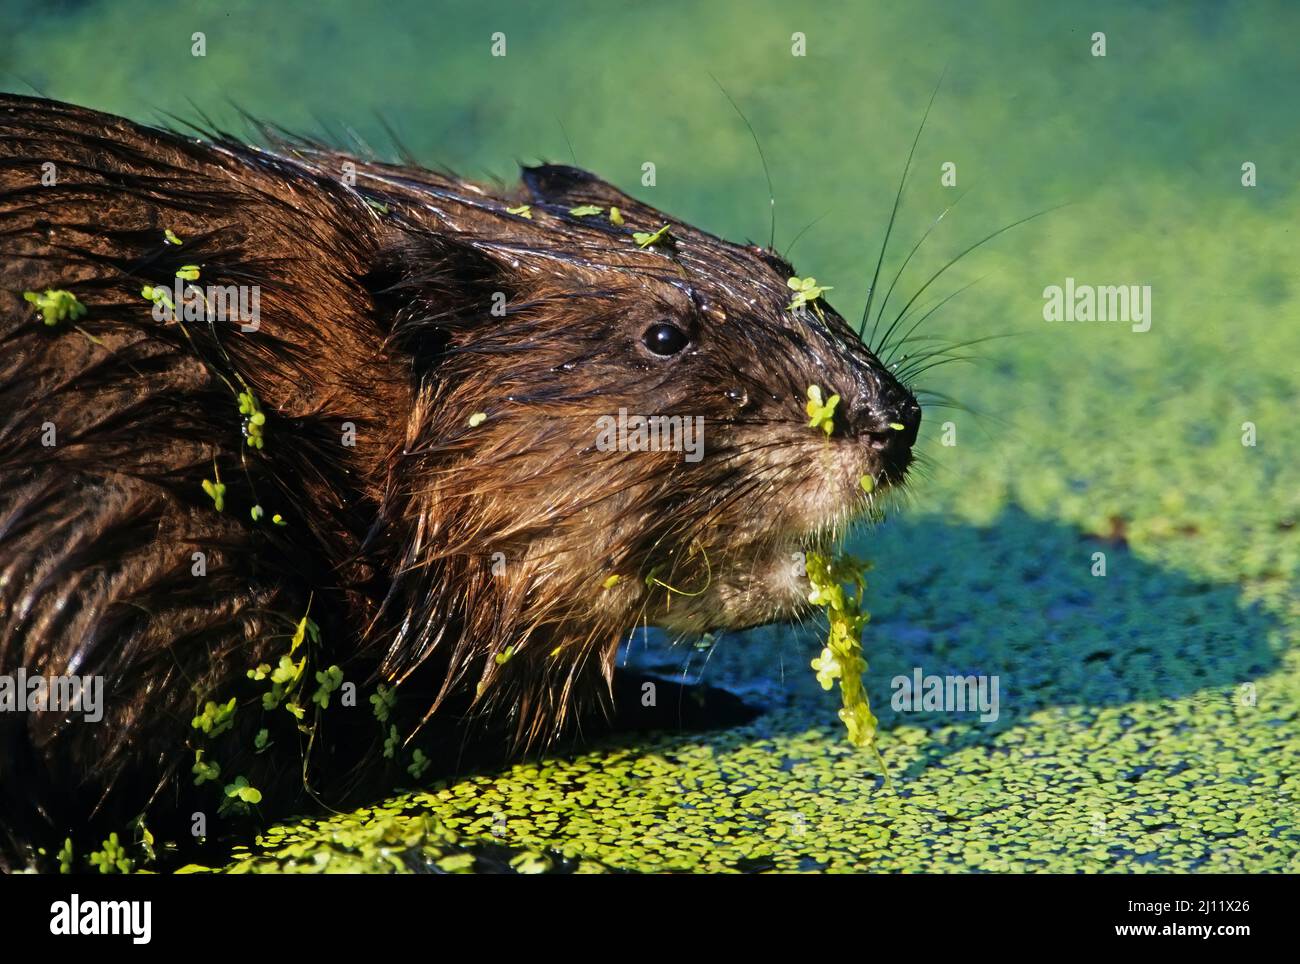 Muskrat feeding up close on duckweed covered pond Stock Photo